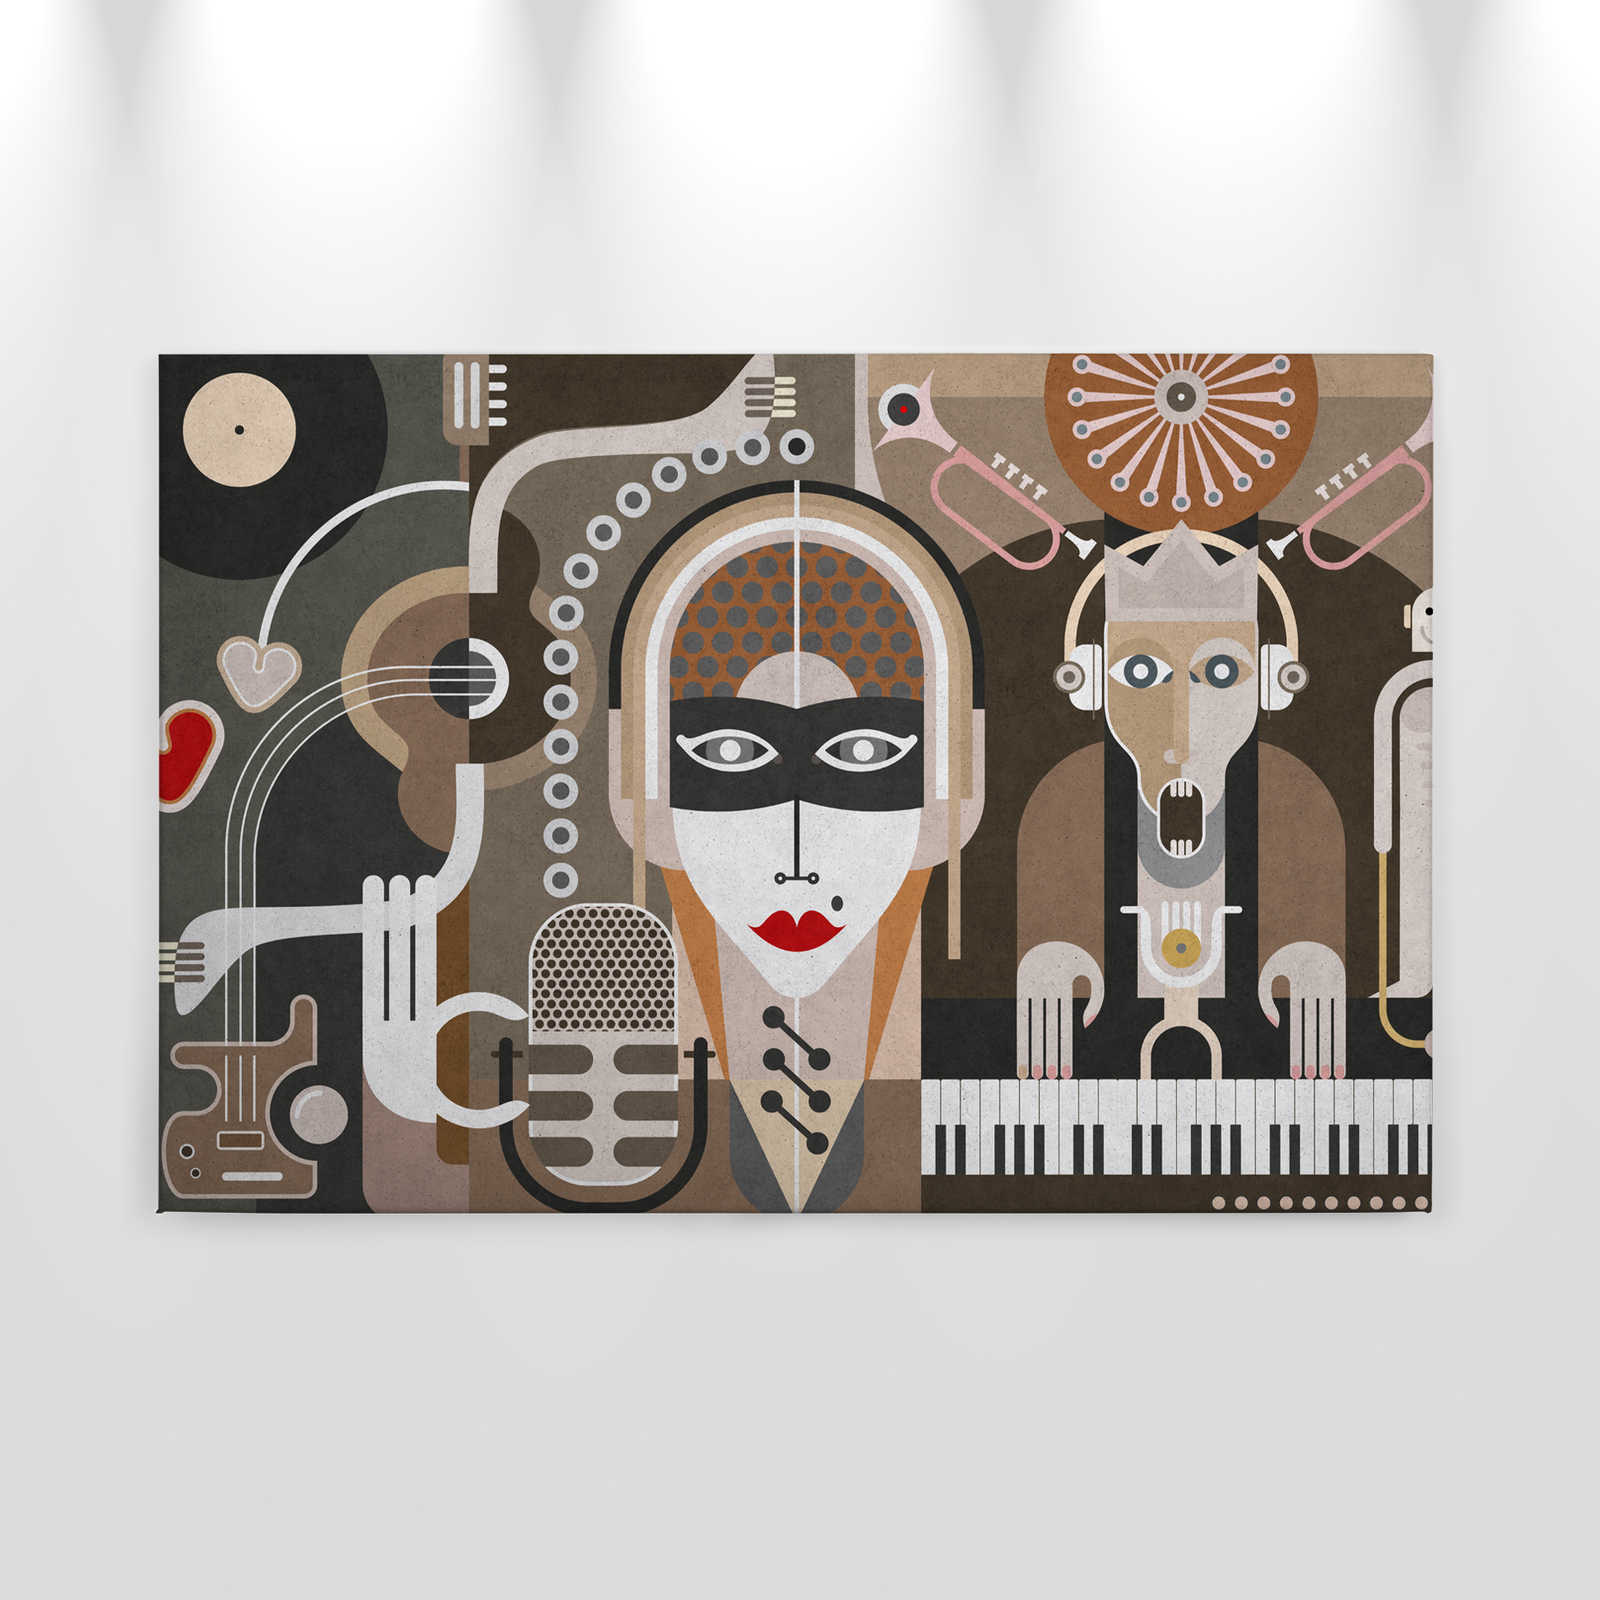             Wall of sound3 - Abstract Canvas Painting with Faces- Structure Concrete - 0.90 m x 0.60 m
        